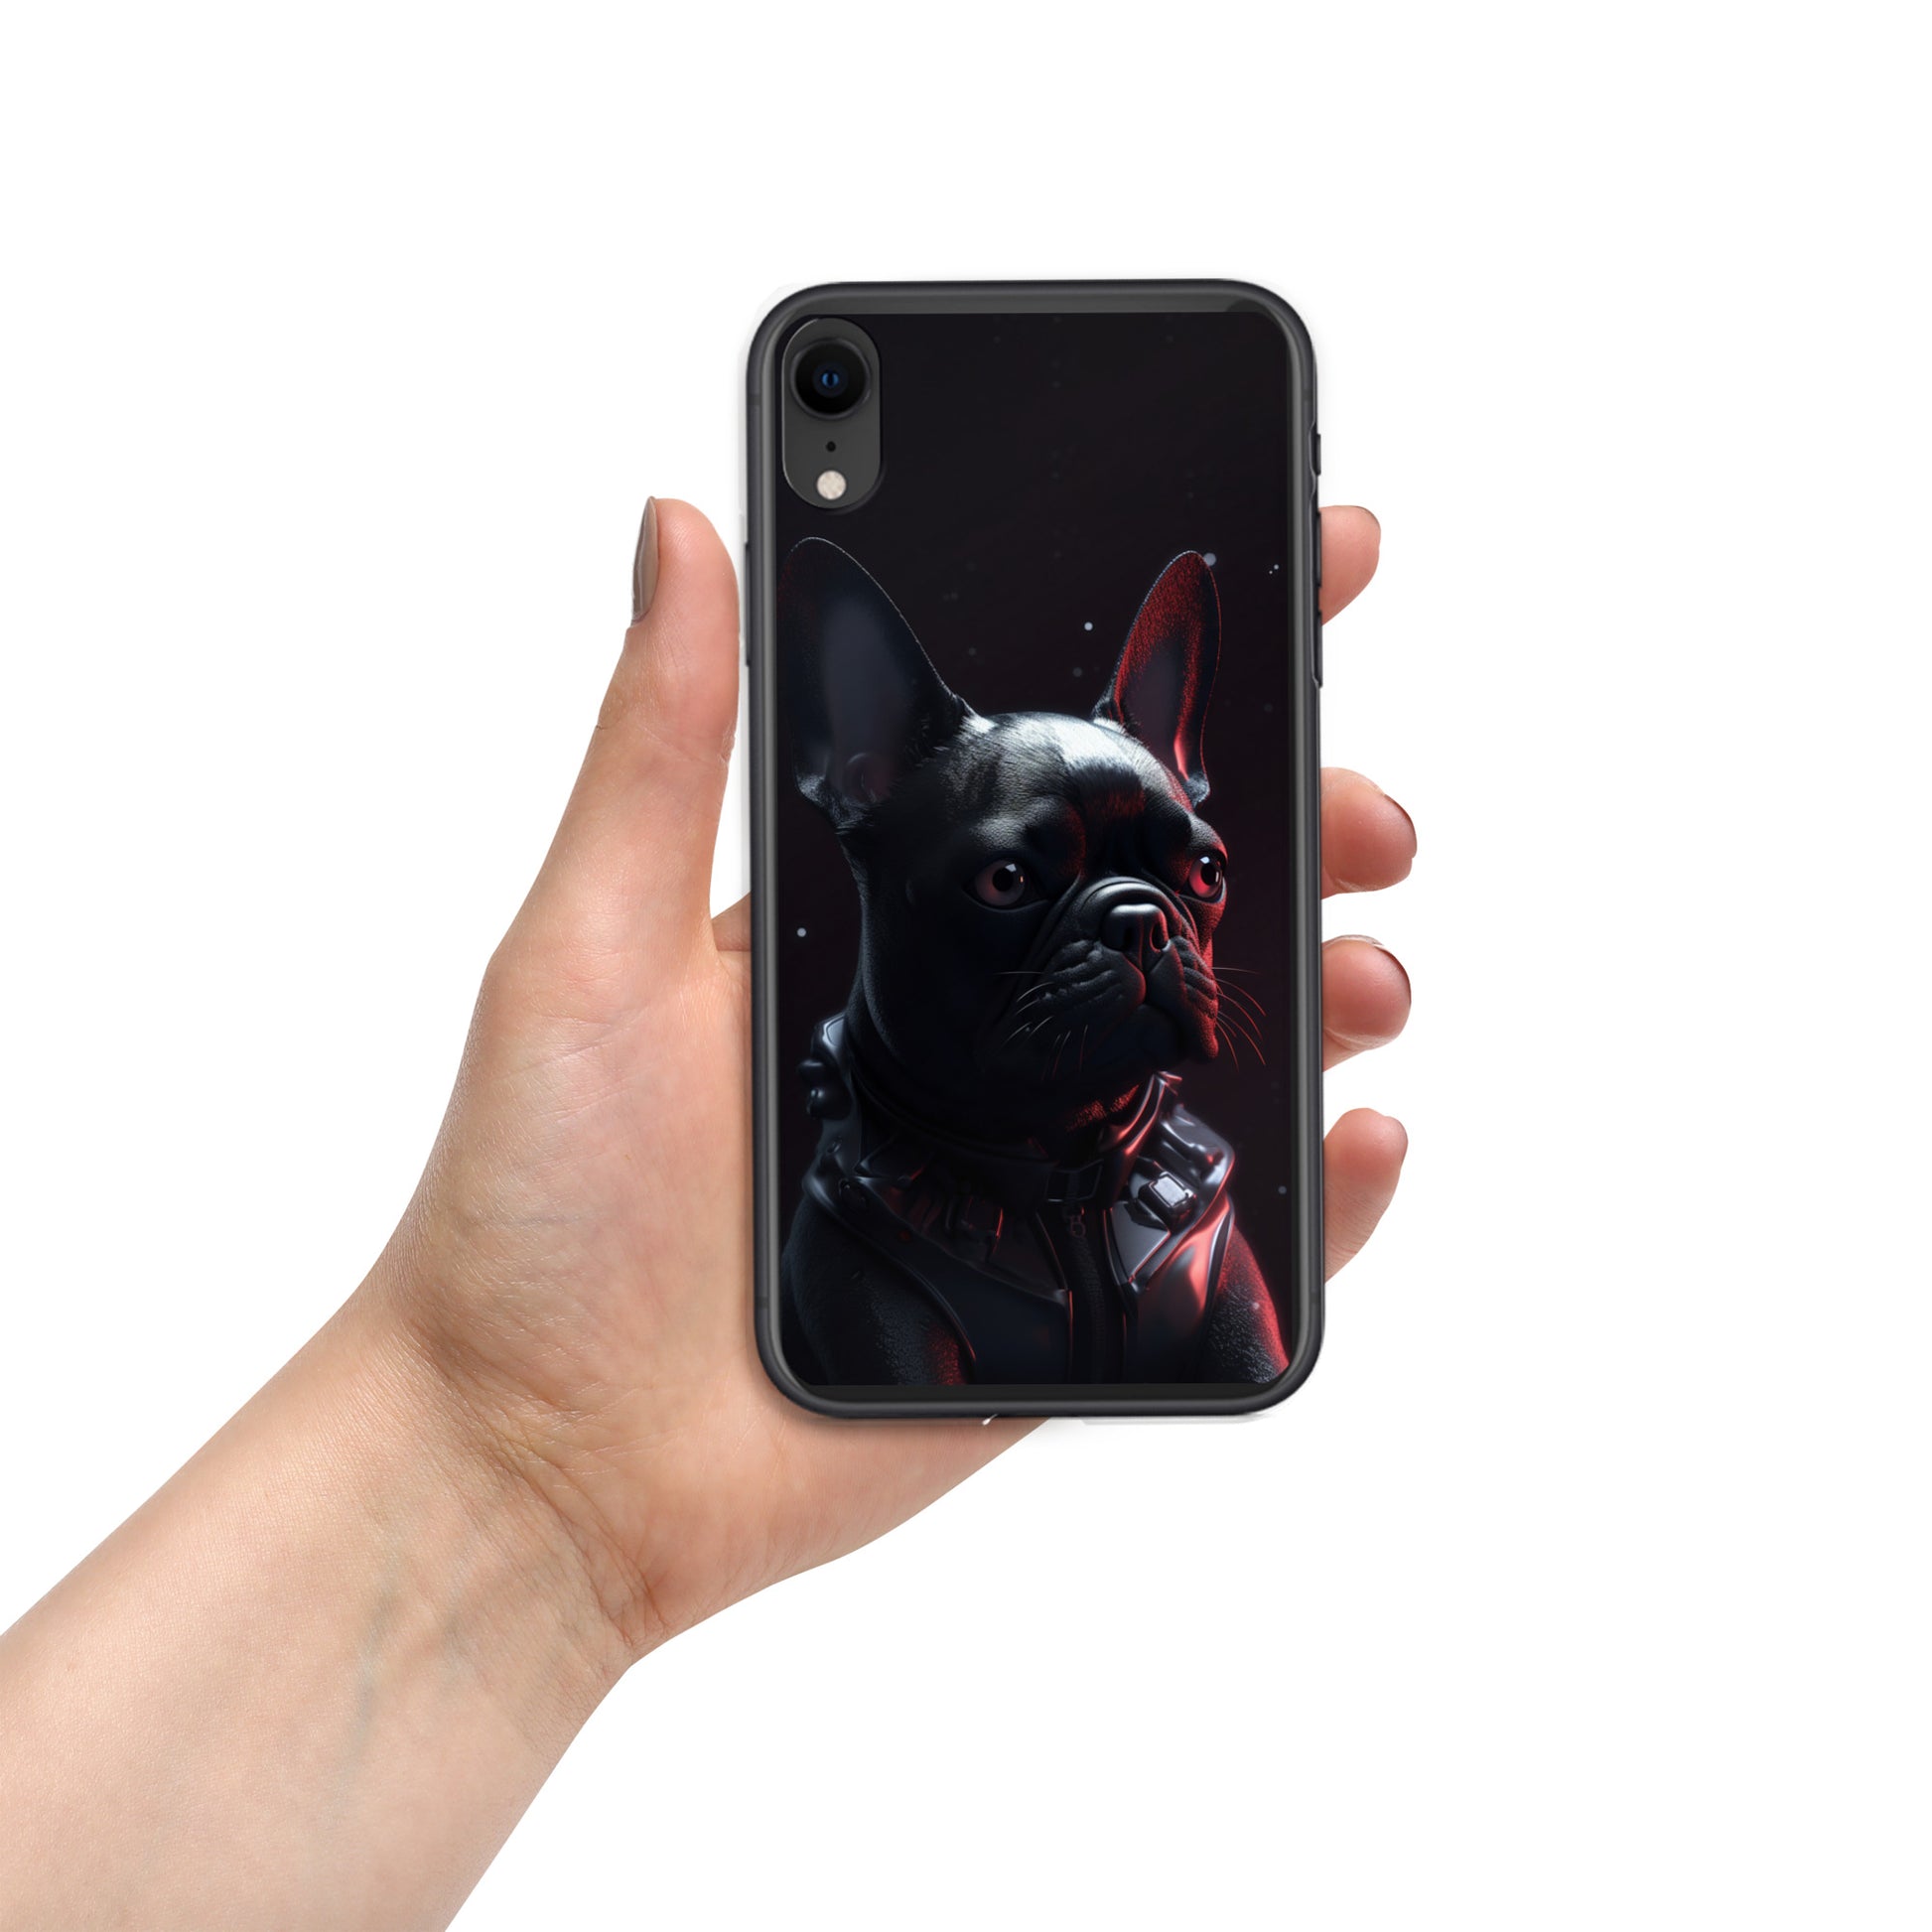 Frenchie Style iPhone Case - Premium Protection with an Artistic Touch